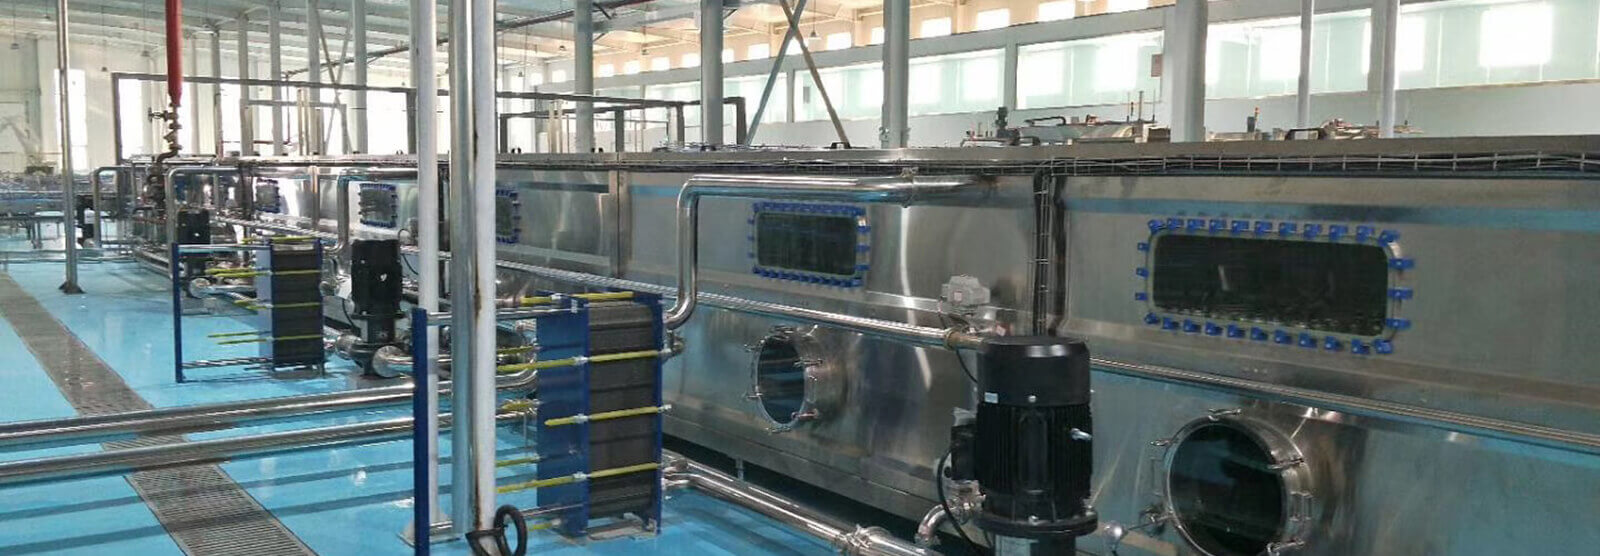 Pasteurizer tunnel